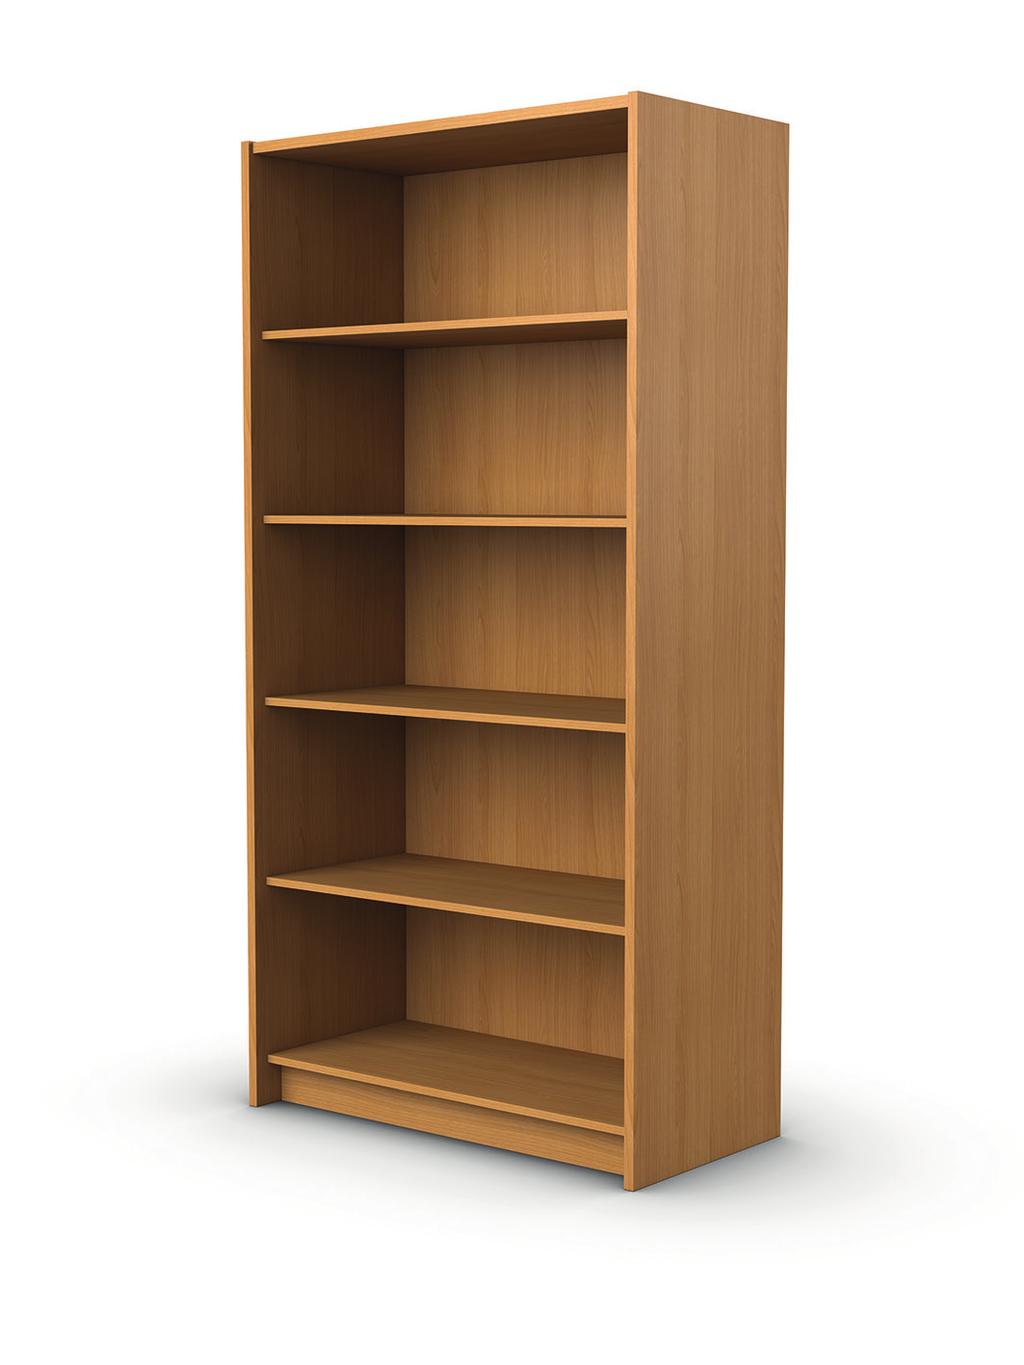 3. The storage unit shown below is sold as a flat pack product.